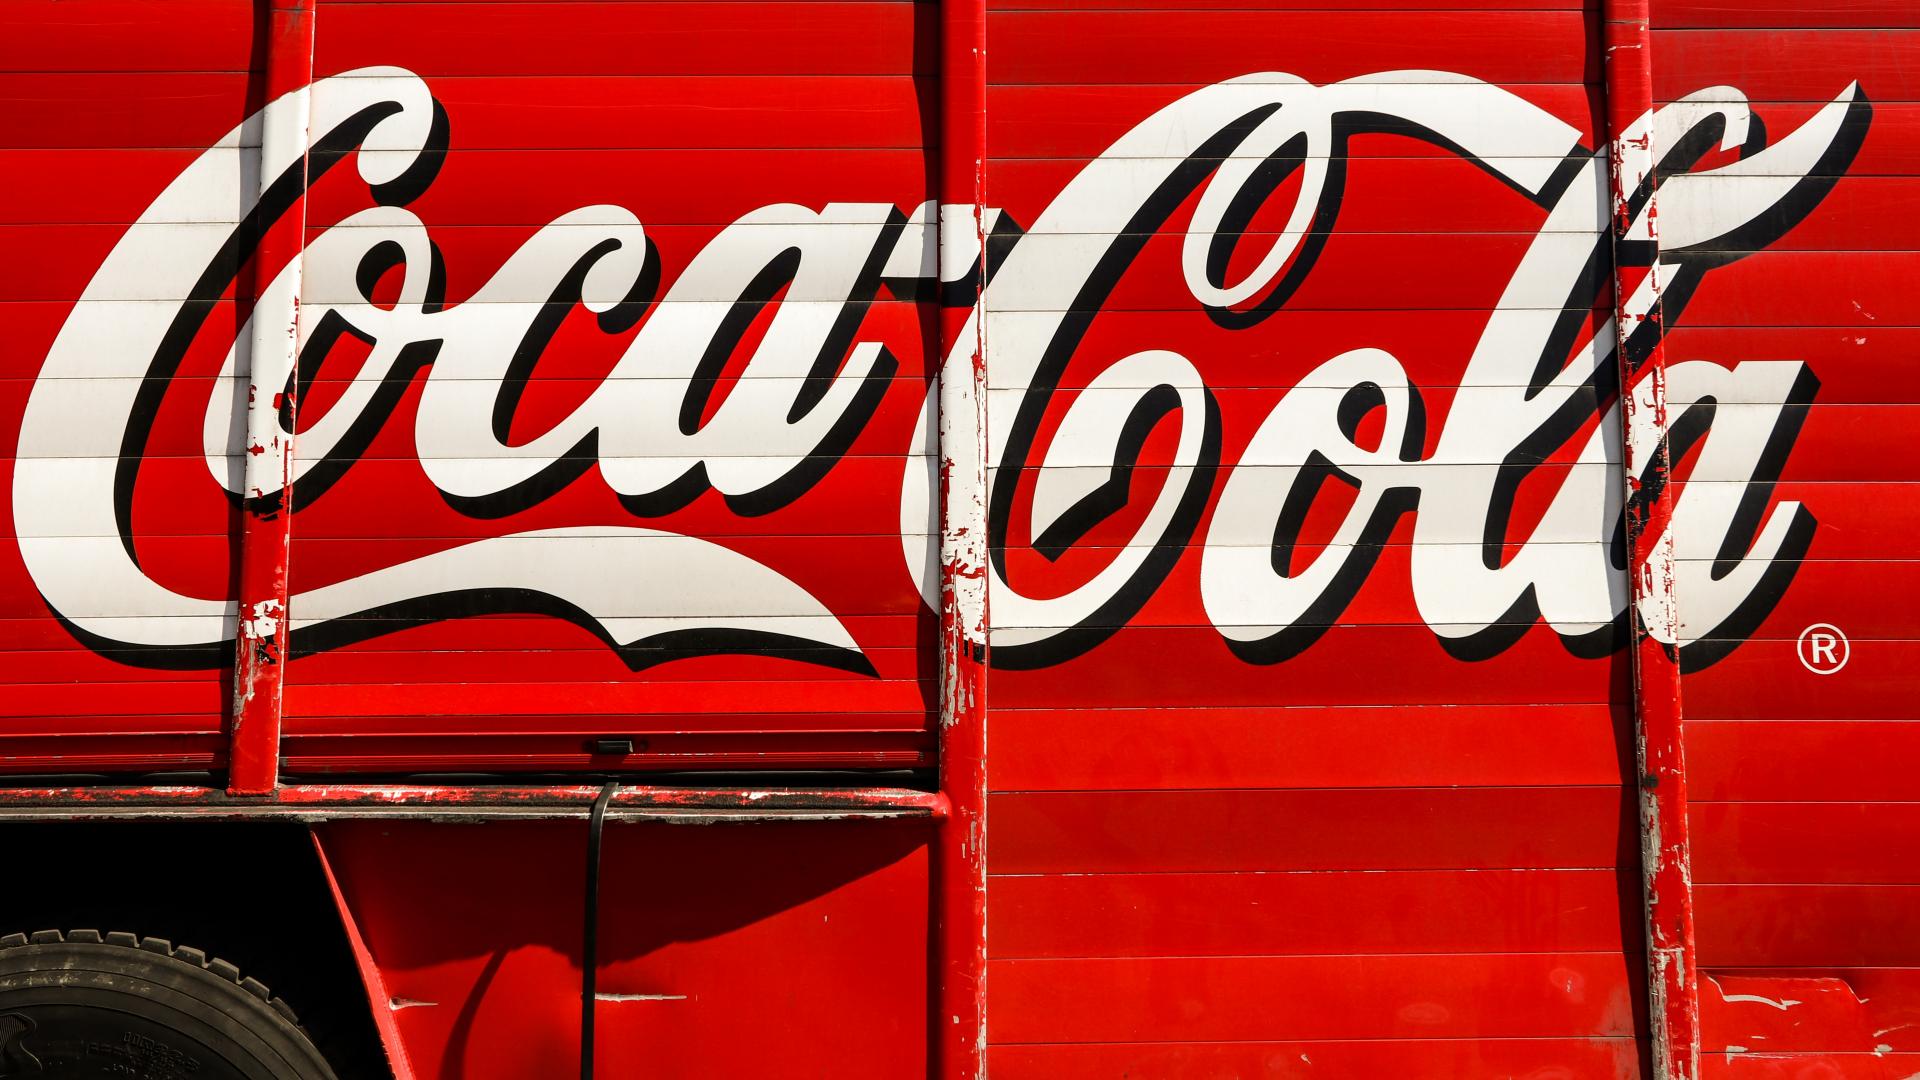 Coca Cola may join cannabis drink trend